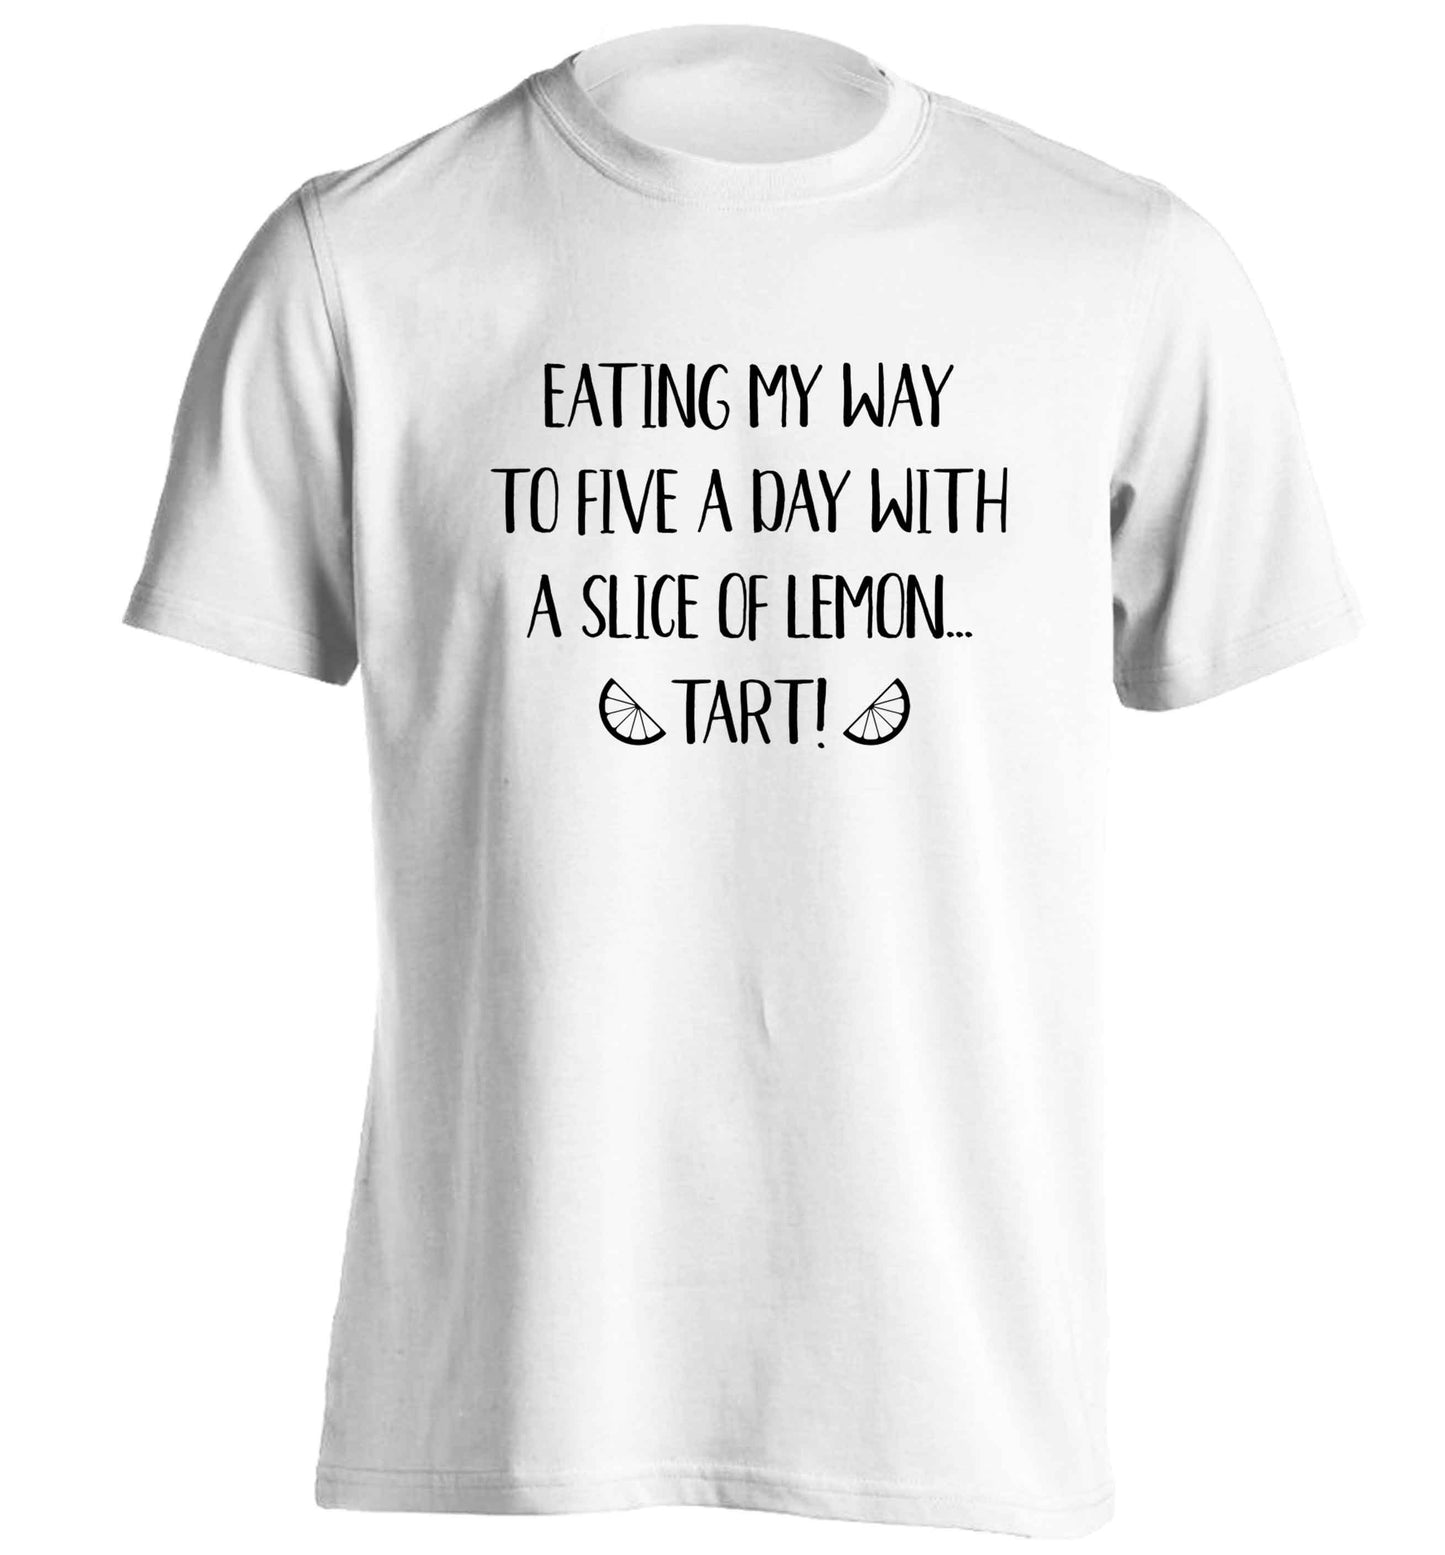 Eating my way to five a day with a slice of lemon tart adults unisex white Tshirt 2XL